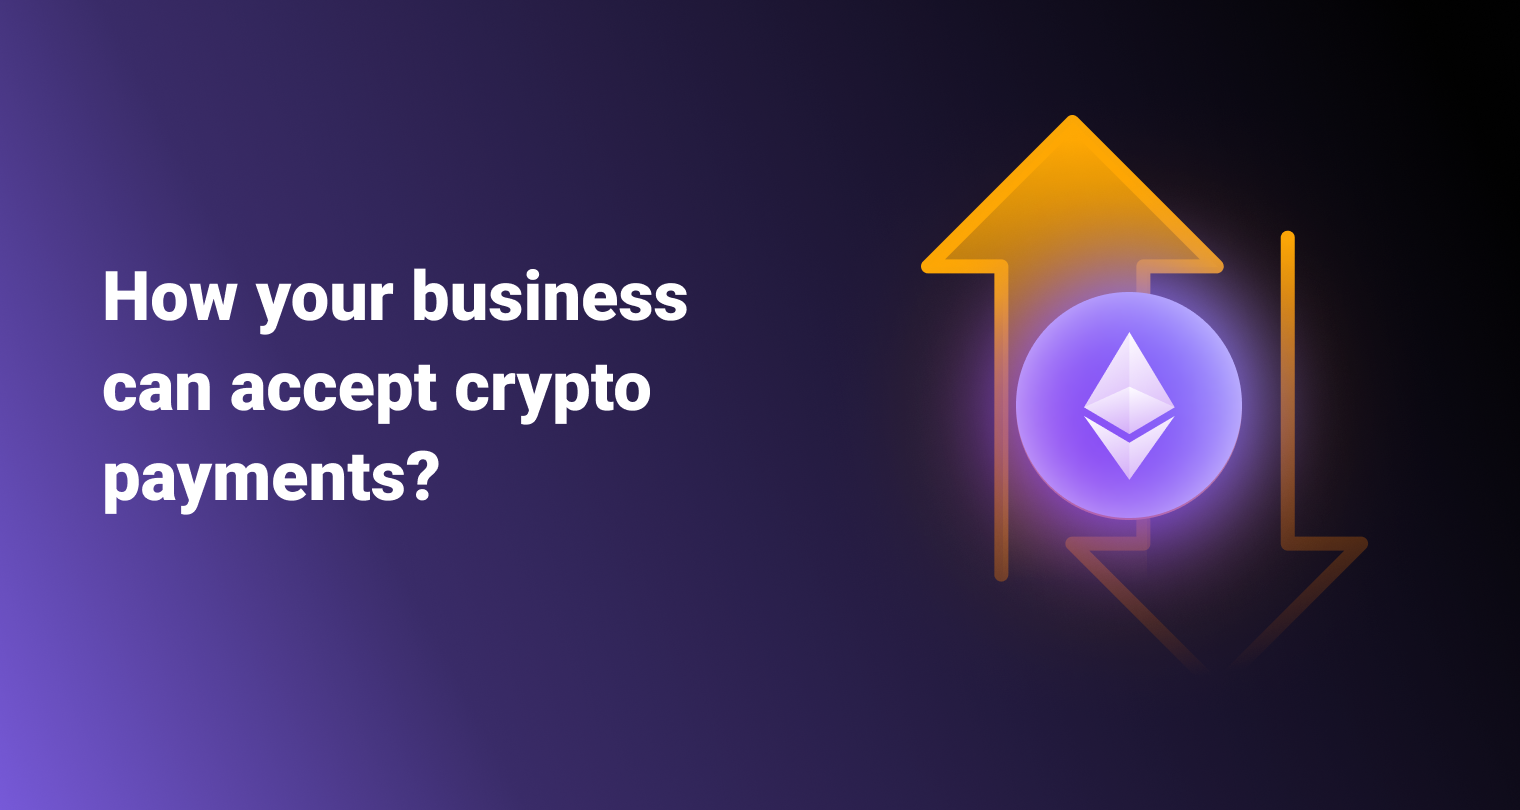 Offering cryptocurrency as an investment option where do I start | Broadridge